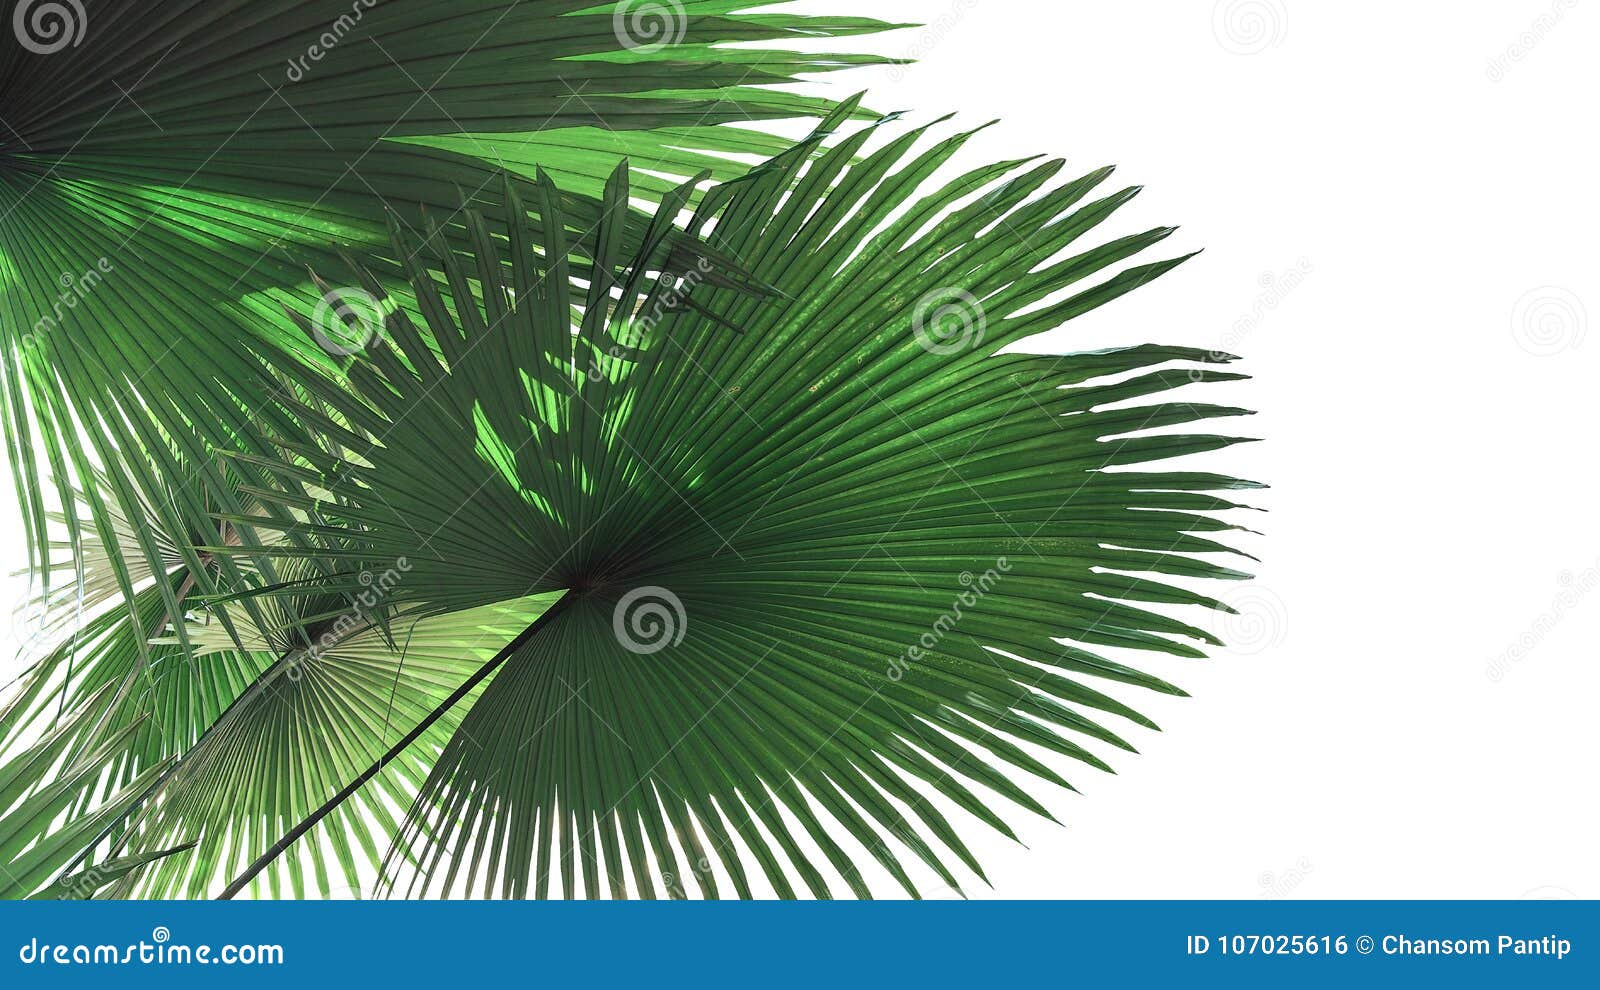 fan-d green leaves with light and shadow of white elephant